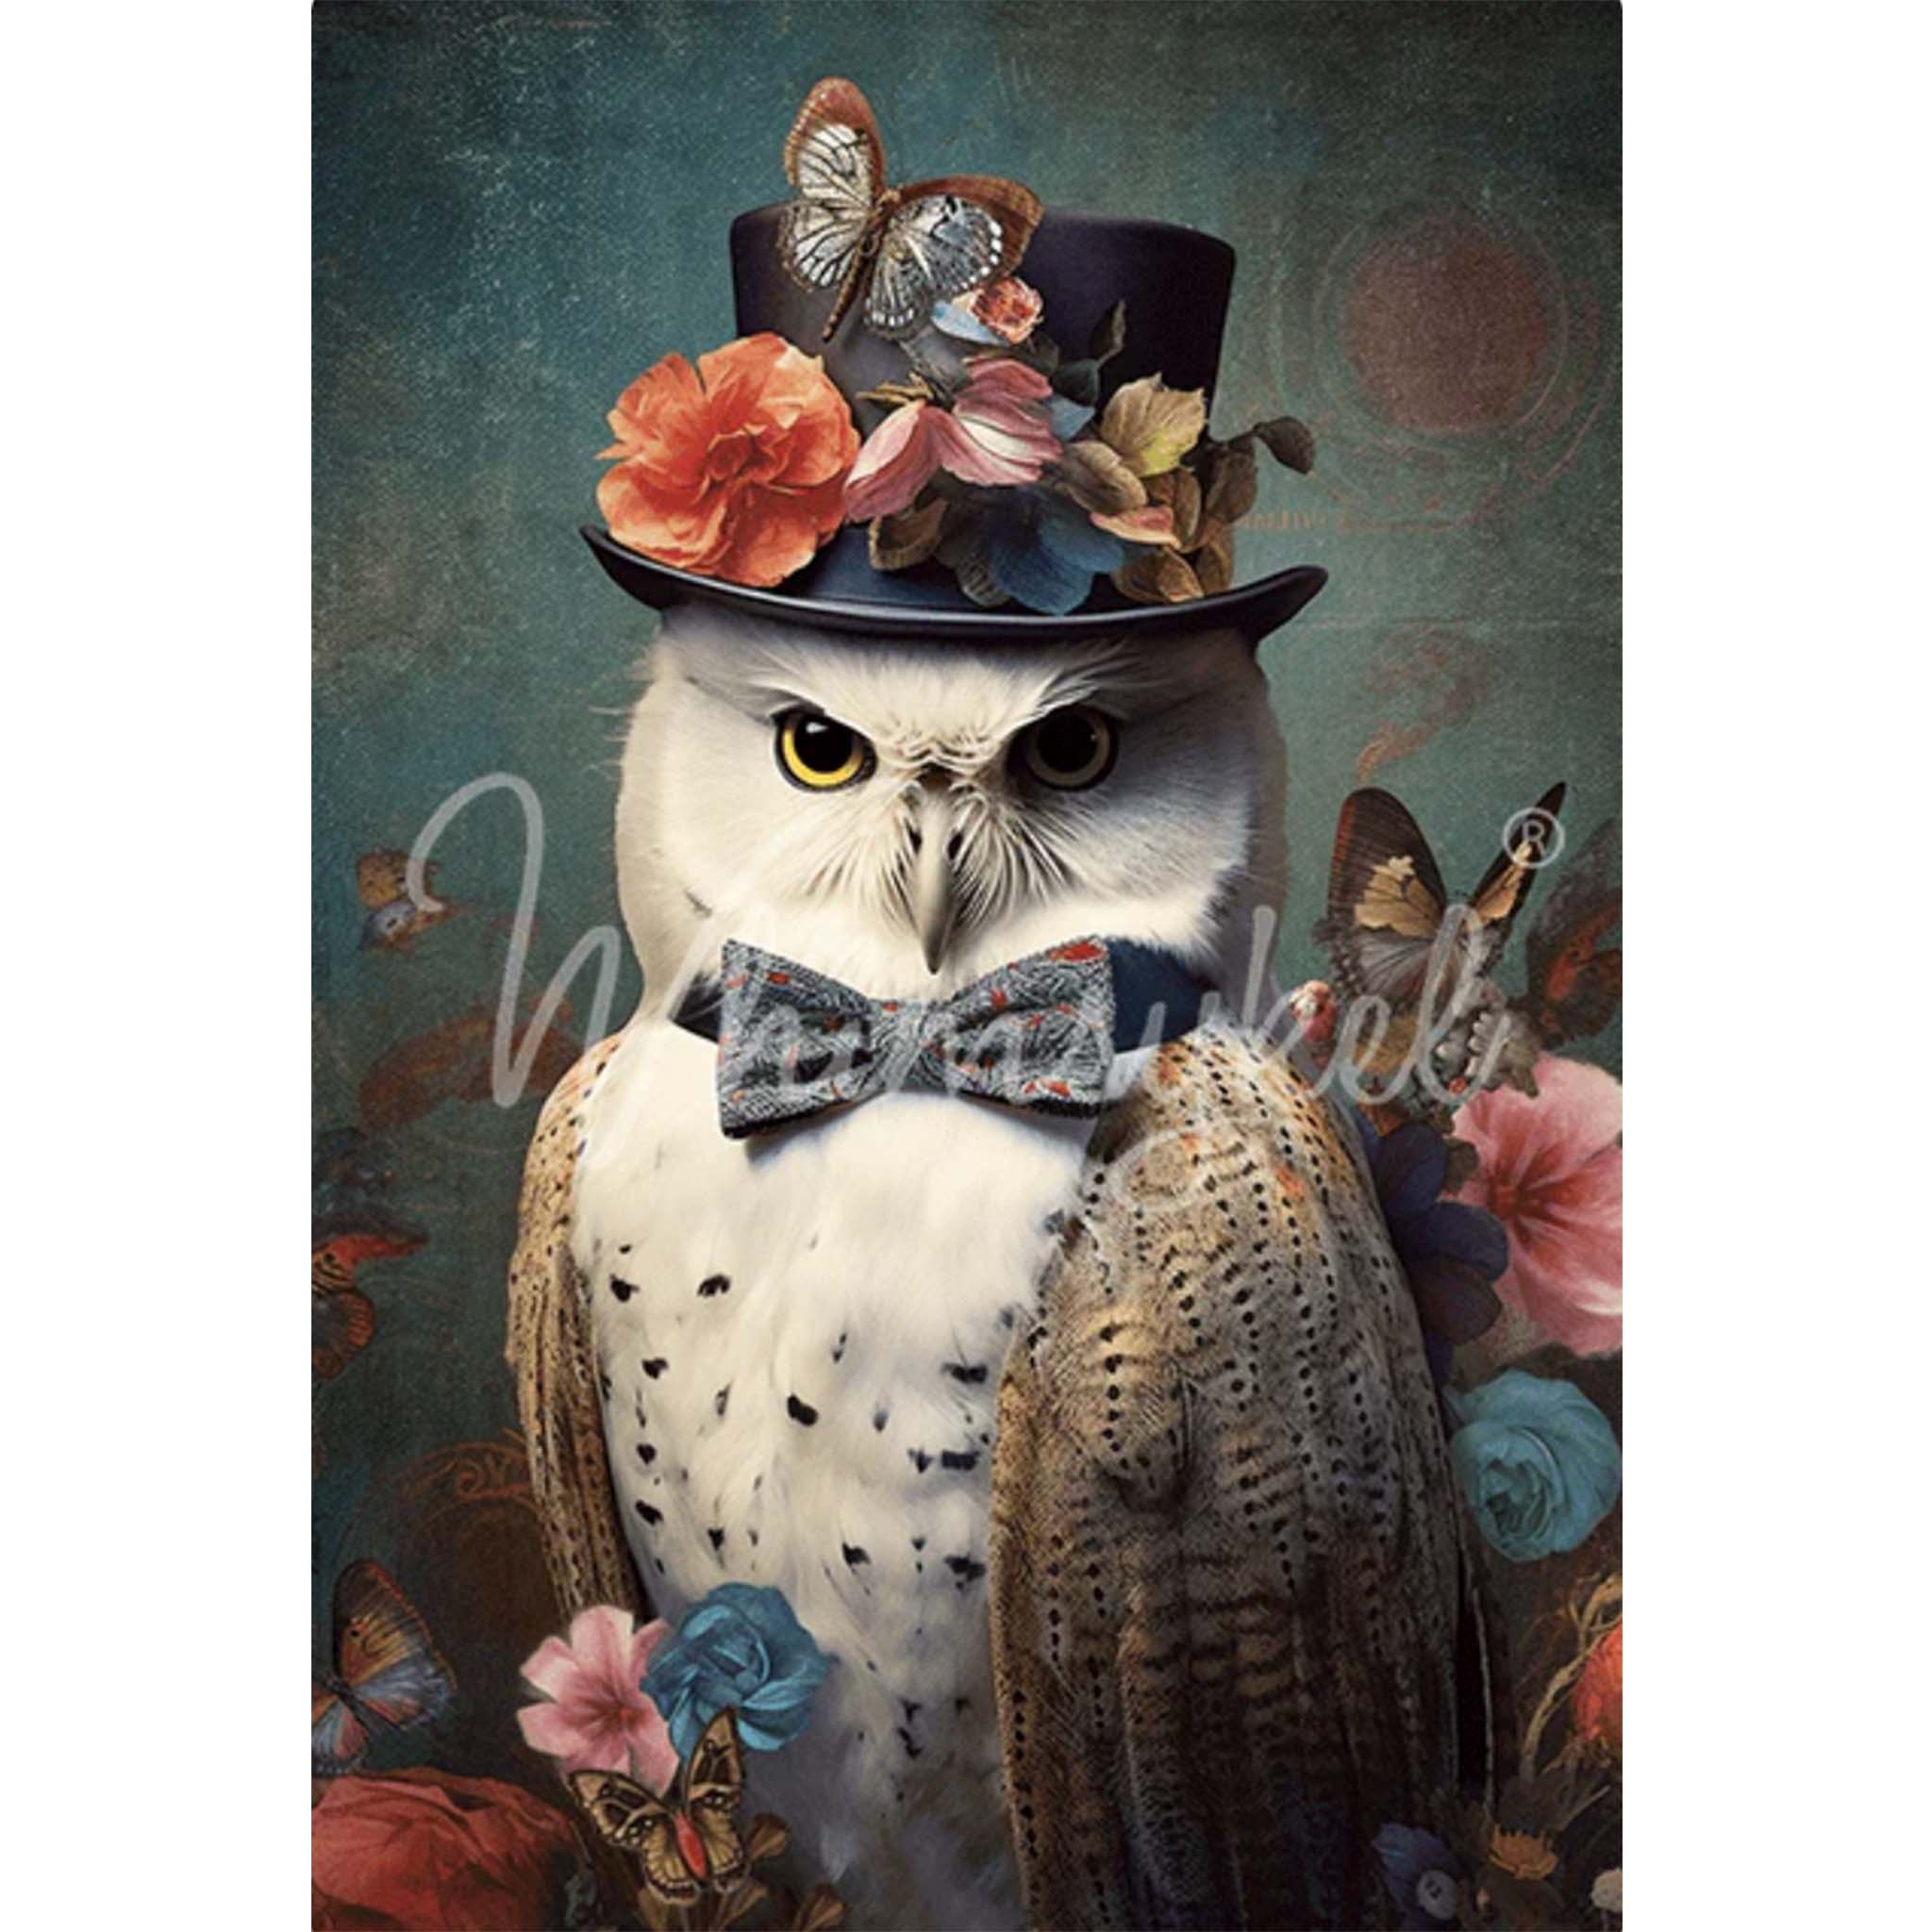 Tissue paper design that features a white owl in a top hat and bow tie against a dark background with pink and blue flowers and butterflies. White borders are on the sides.